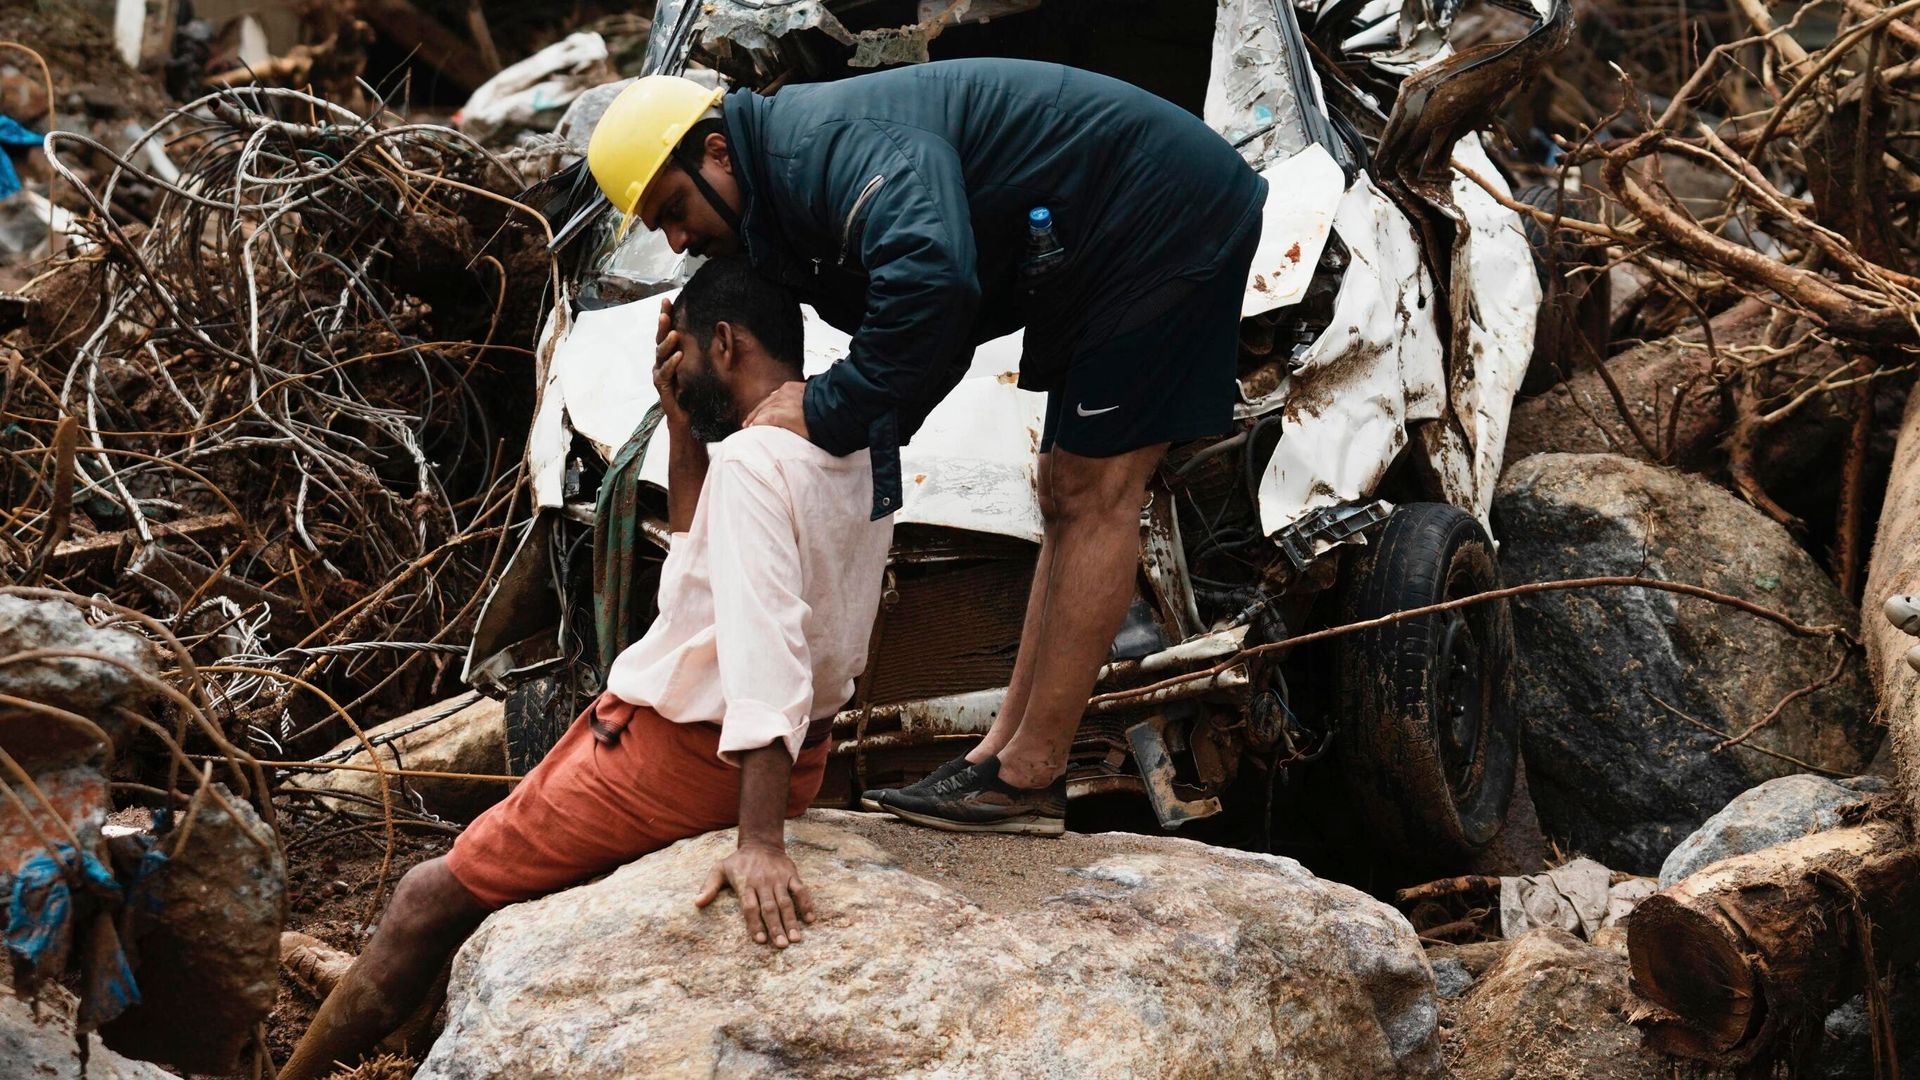 More than 350 people killed in landslides - as experts question tourism's role in tragedy